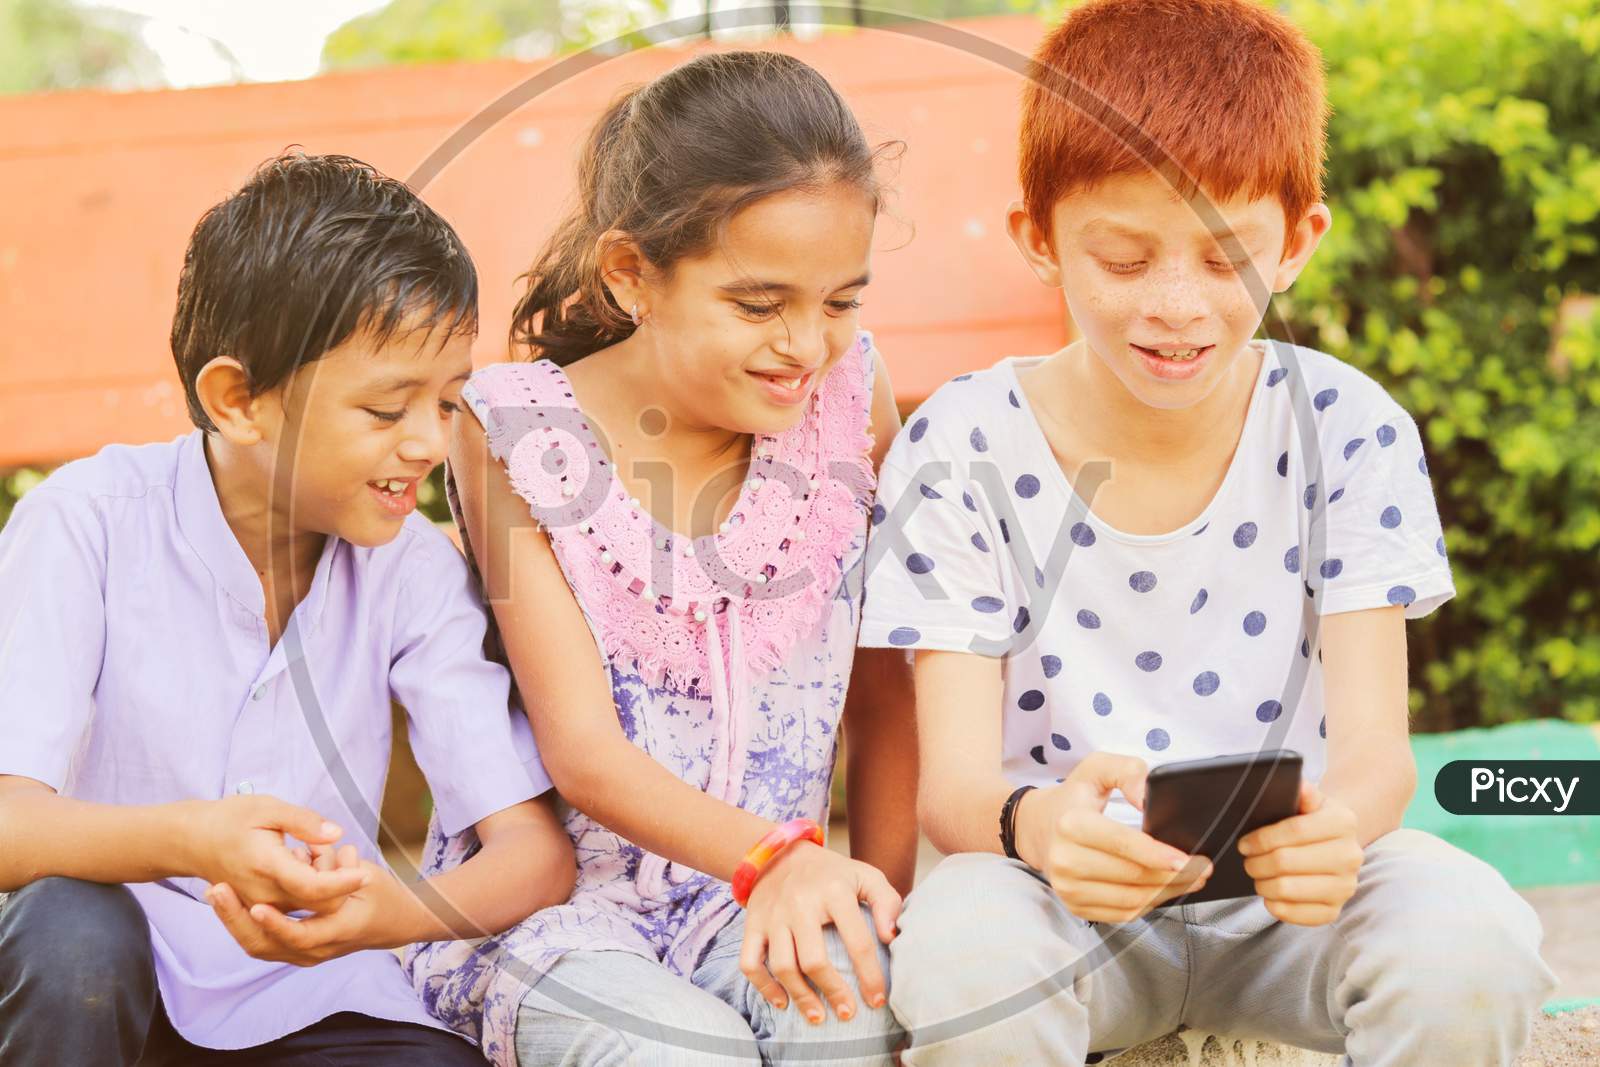 Children Busy In Using Mobile Phone At Park - Concept Of Kids On Mobile Devices And Technology Addiction - Young Teens Using Technology, Internet On Smartphone.